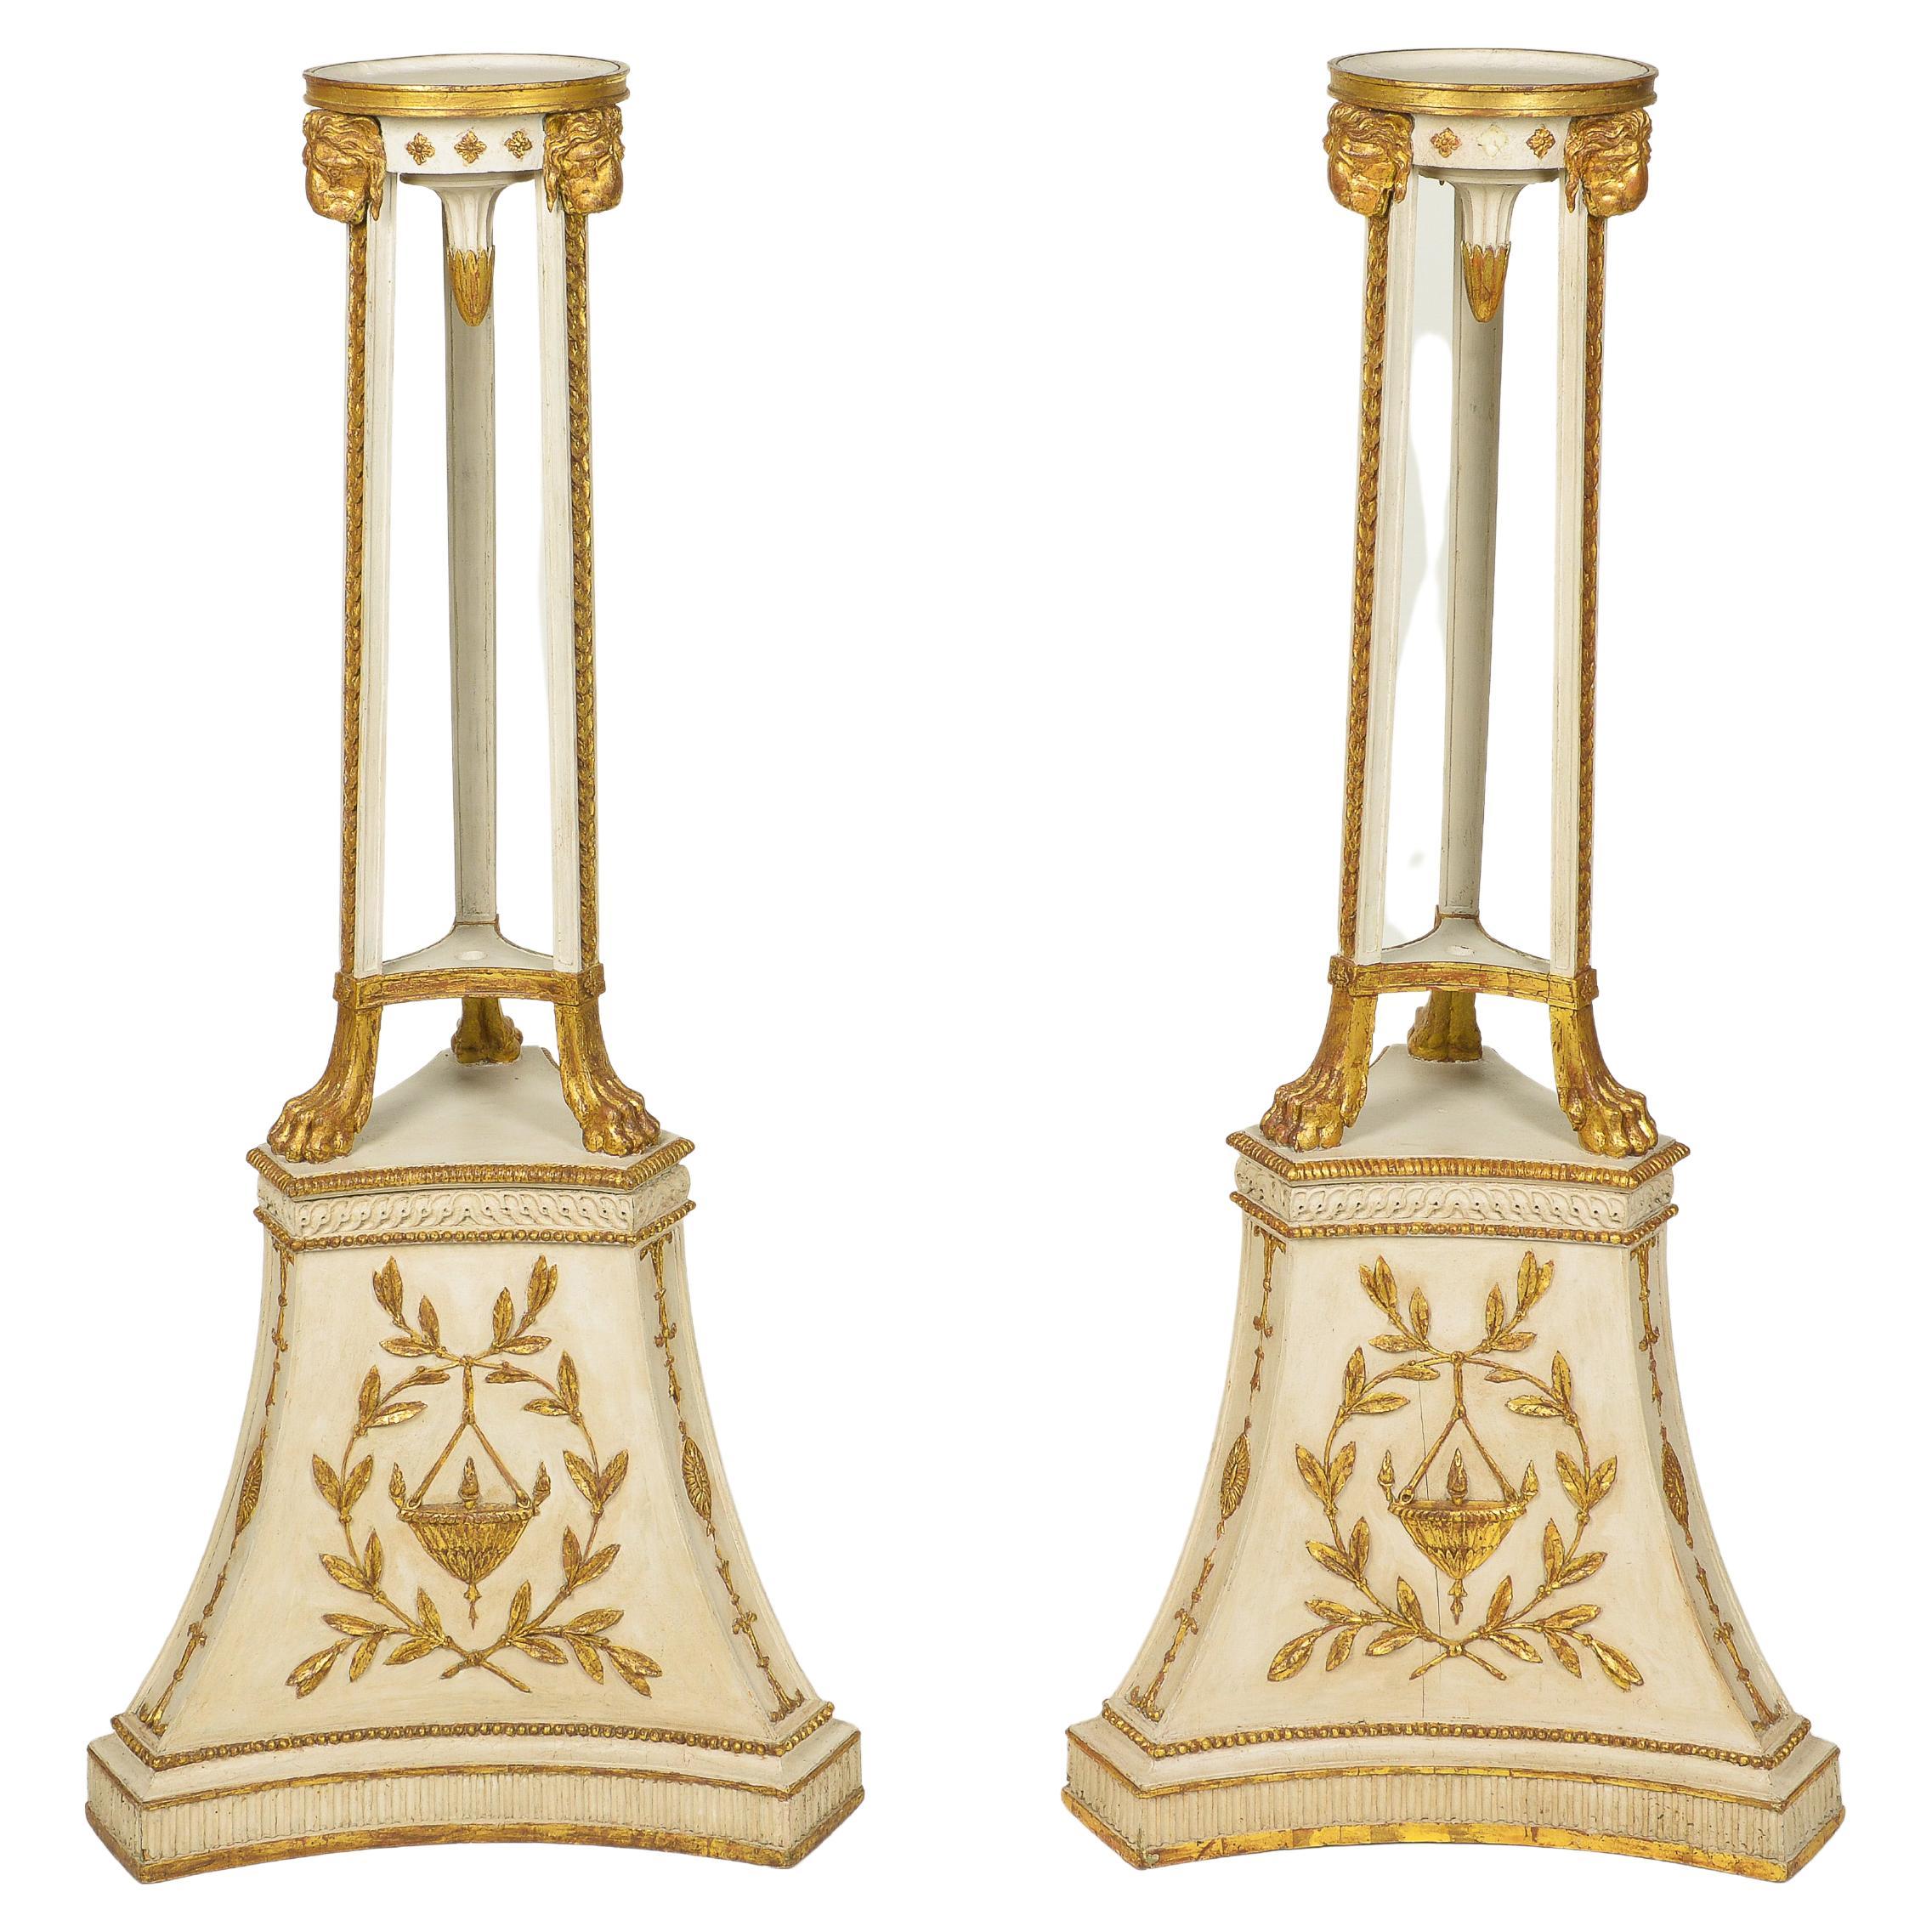 Pair of Gustavian White and Parcel Gilt Torcheres